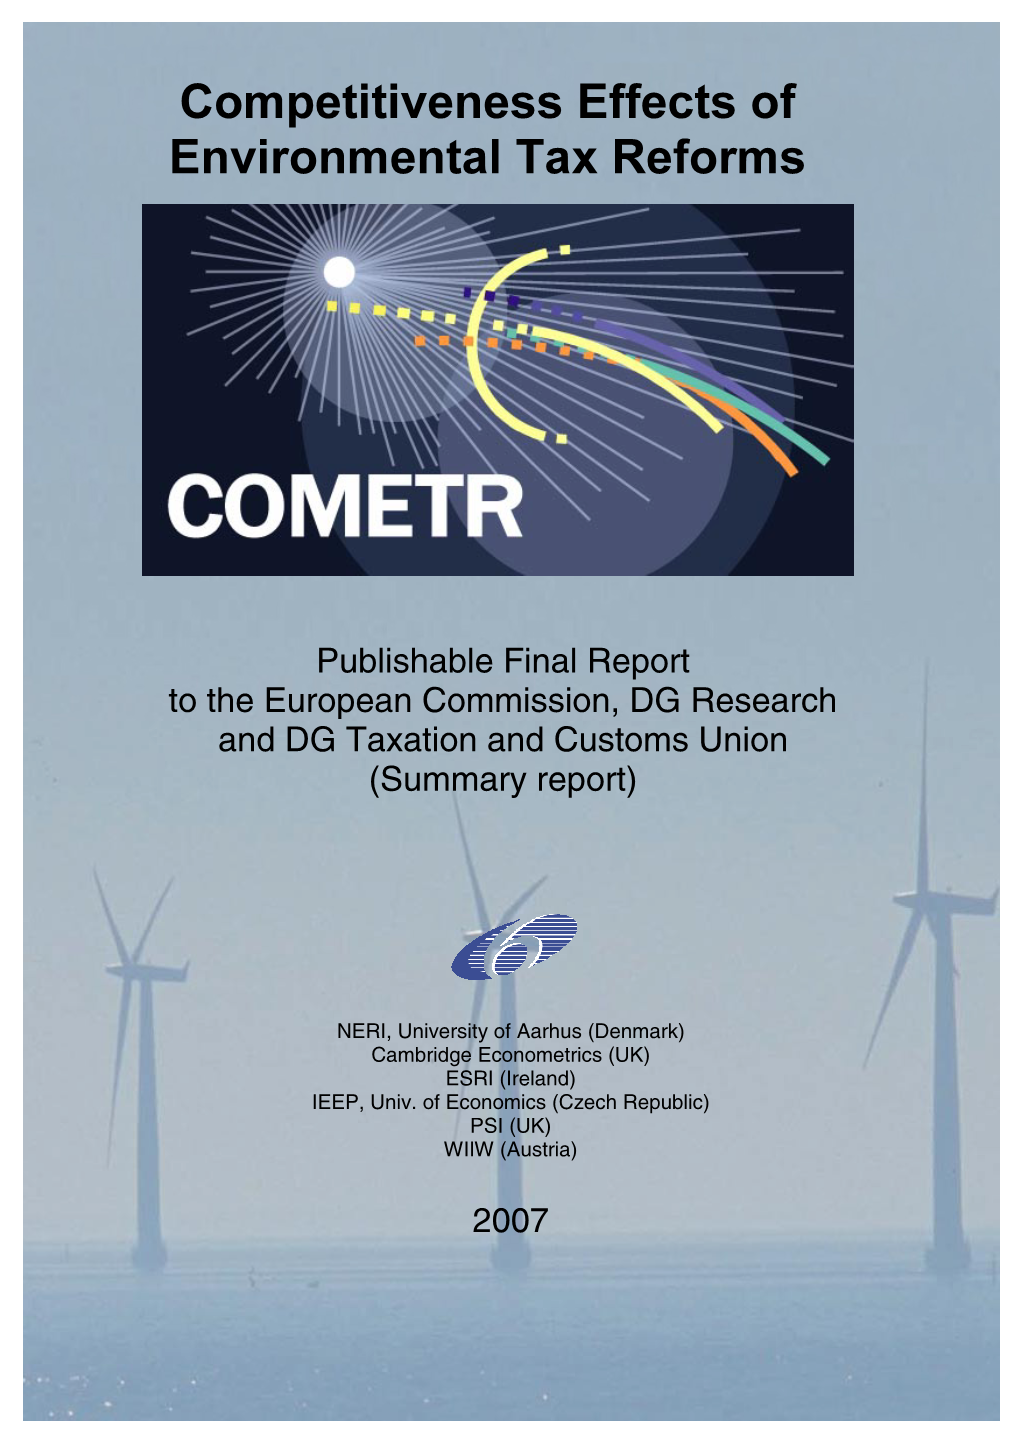 COMETR Competitiveness Effects of Environmental Tax Reforms